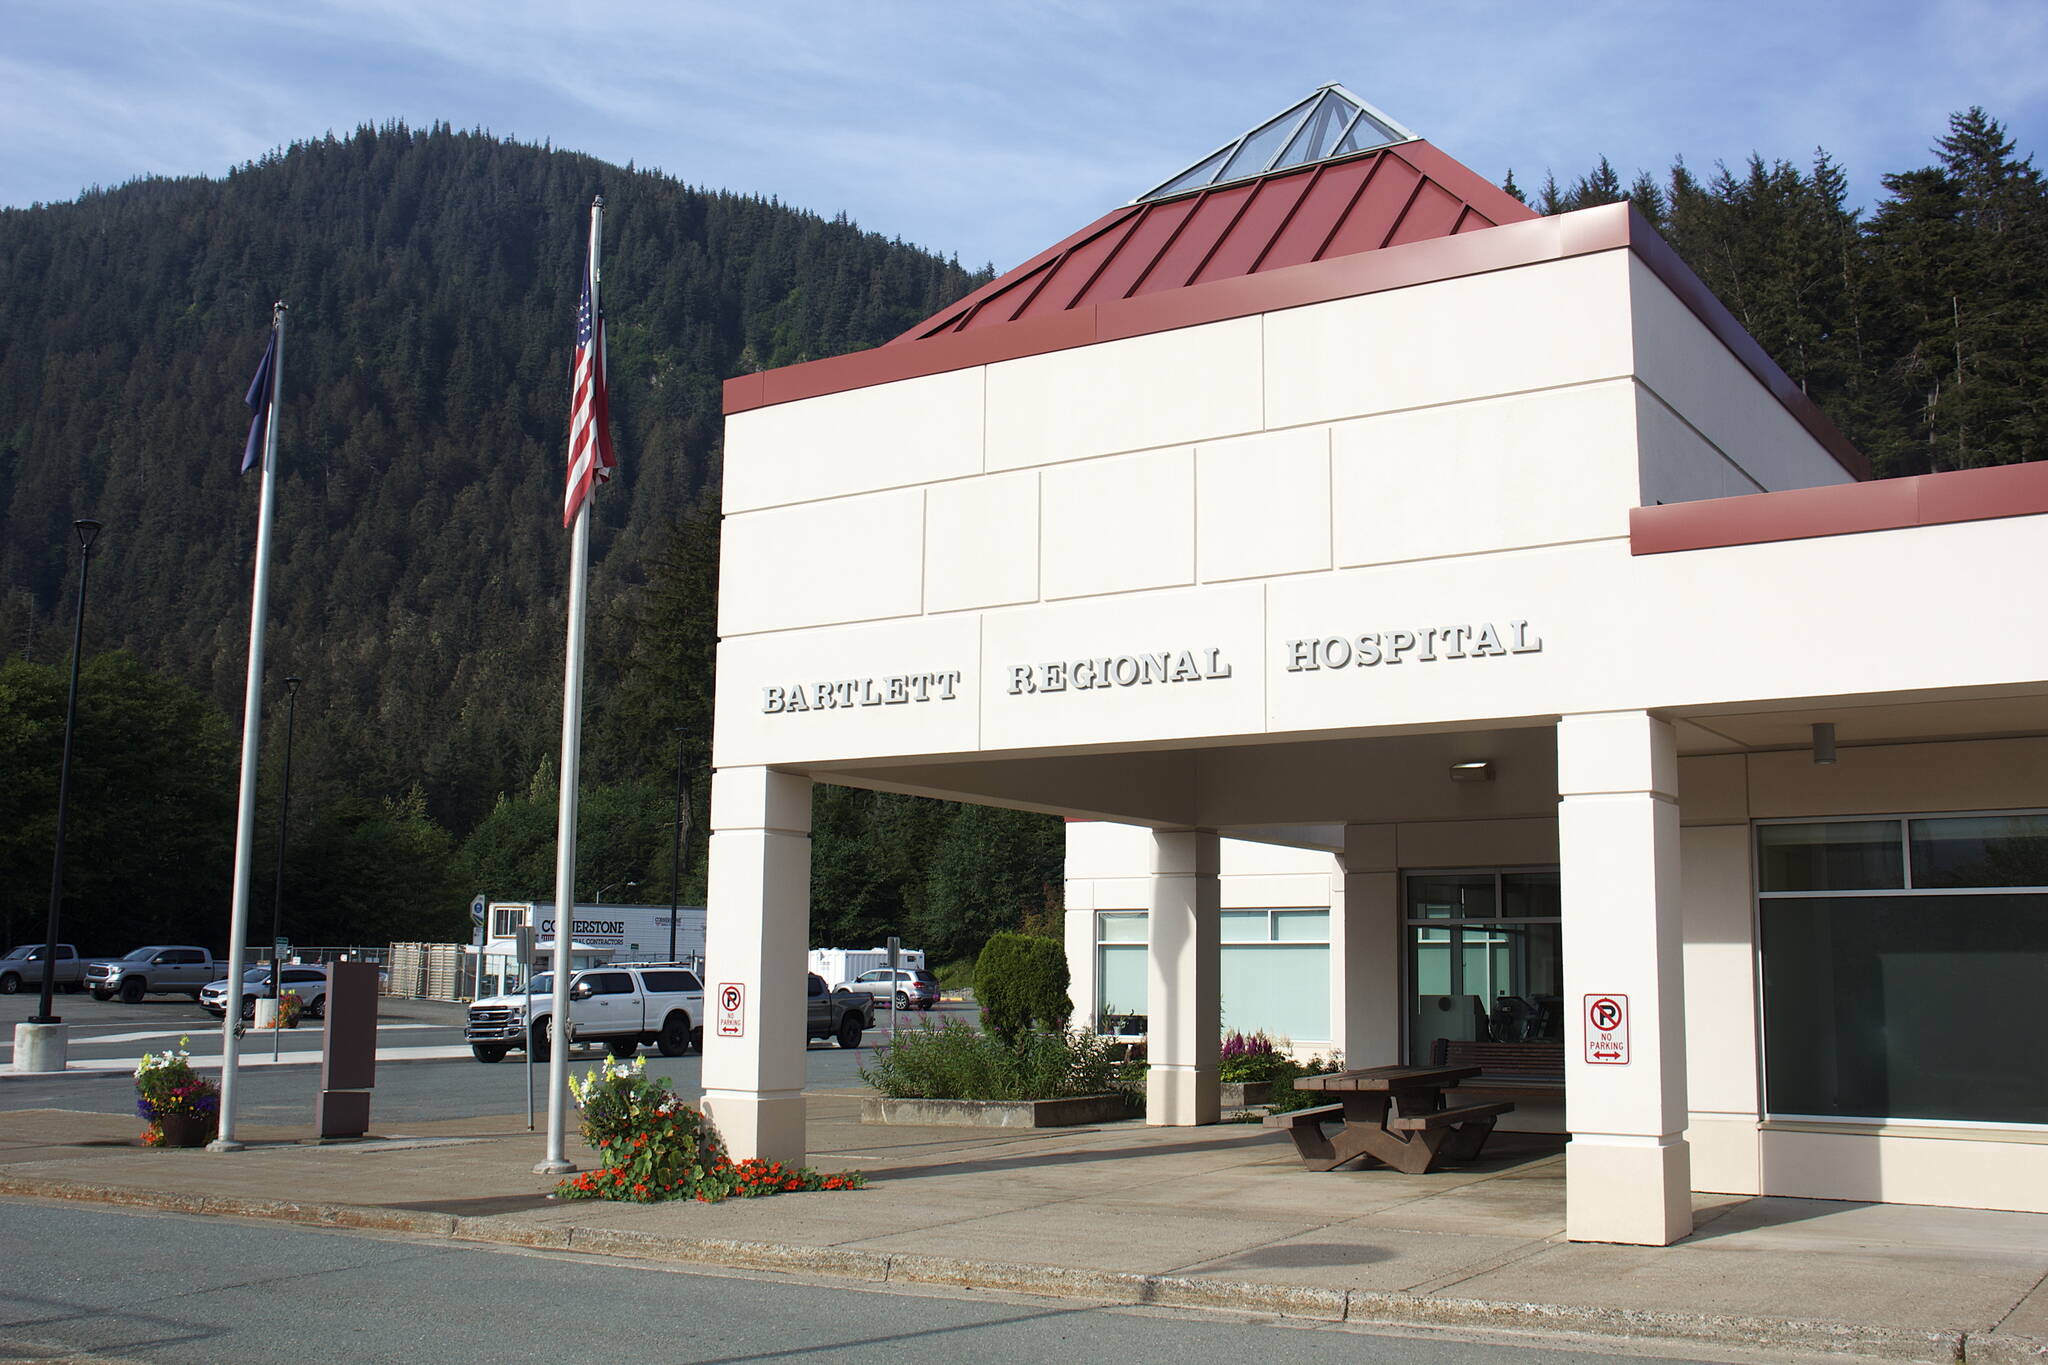 The main entrance at Bartlett Regional Hospital, which has experience staffing shortages, leadership turnover and concerns expressed about patient care in recent months. (Mark Sabbatini / Juneau Empire)